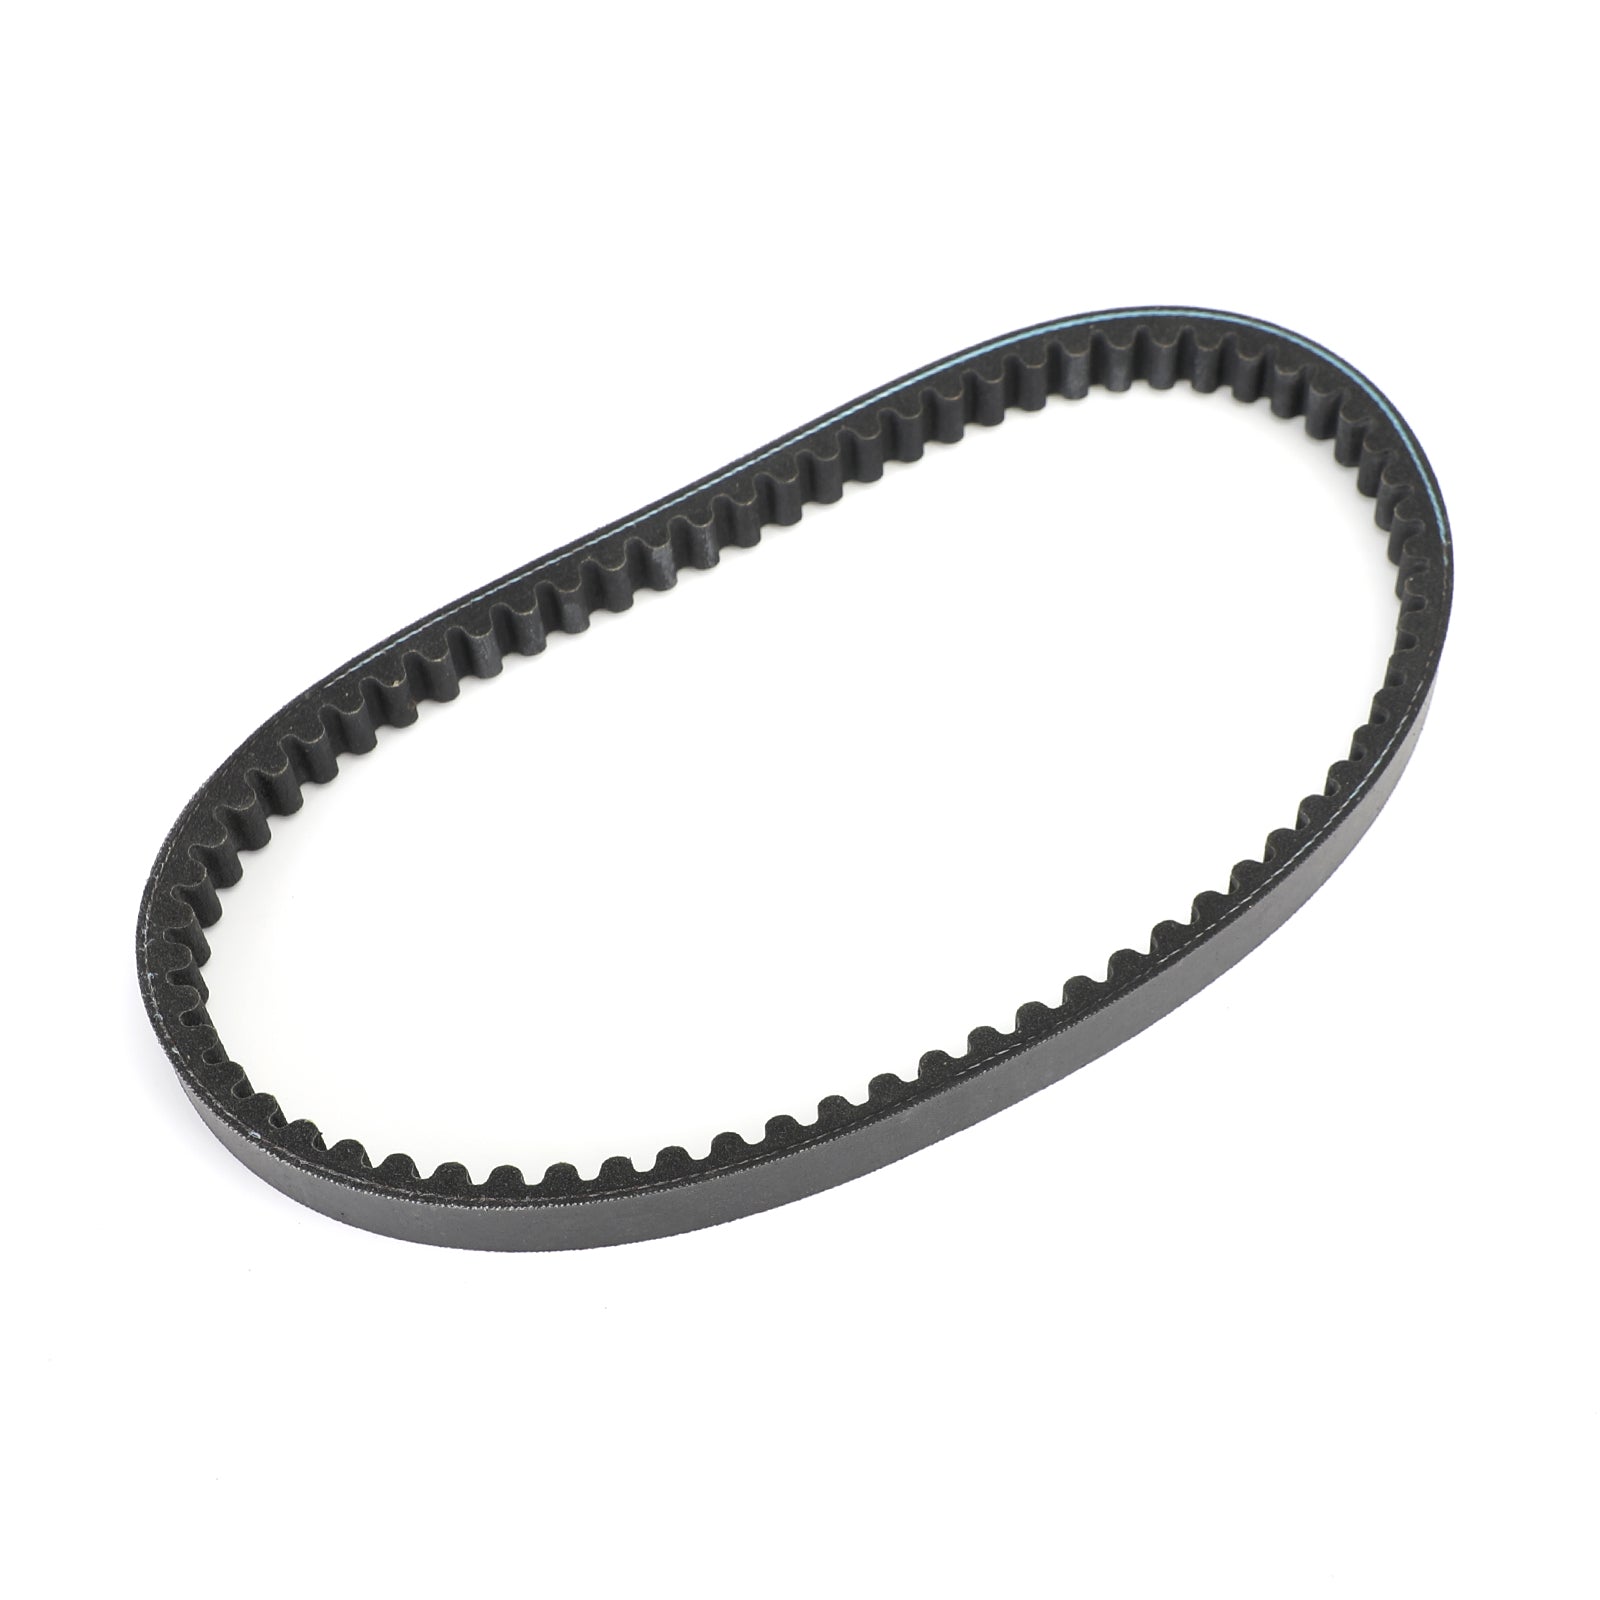 Generic Black Drive Belt 669 18 30 For GY6 50CC Scooter @ Best